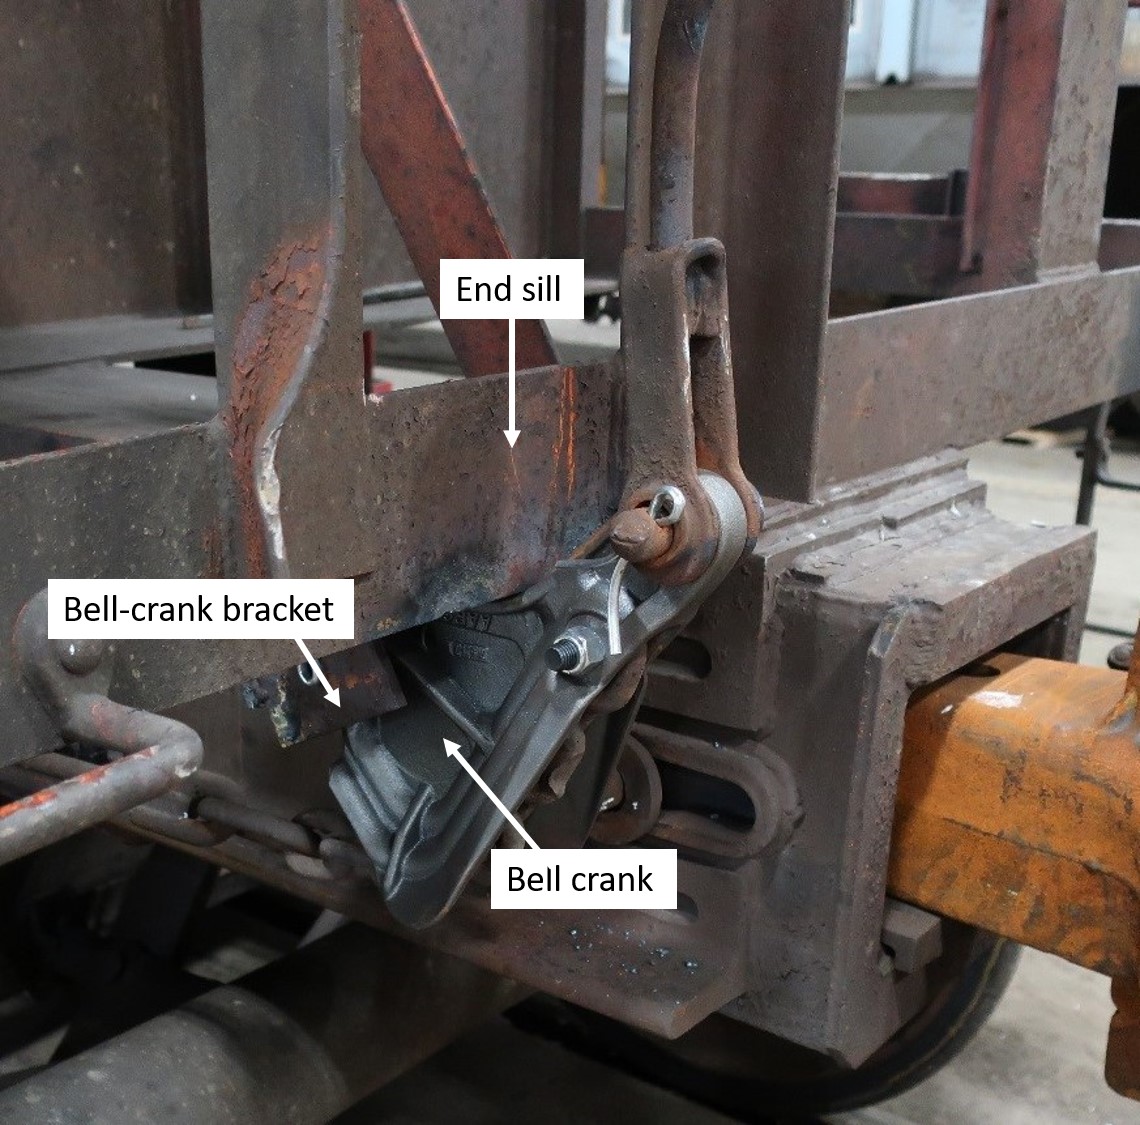 Position of bell crank and bracket with hand brake applied and bell-crank bracket cut (Source: TSB)